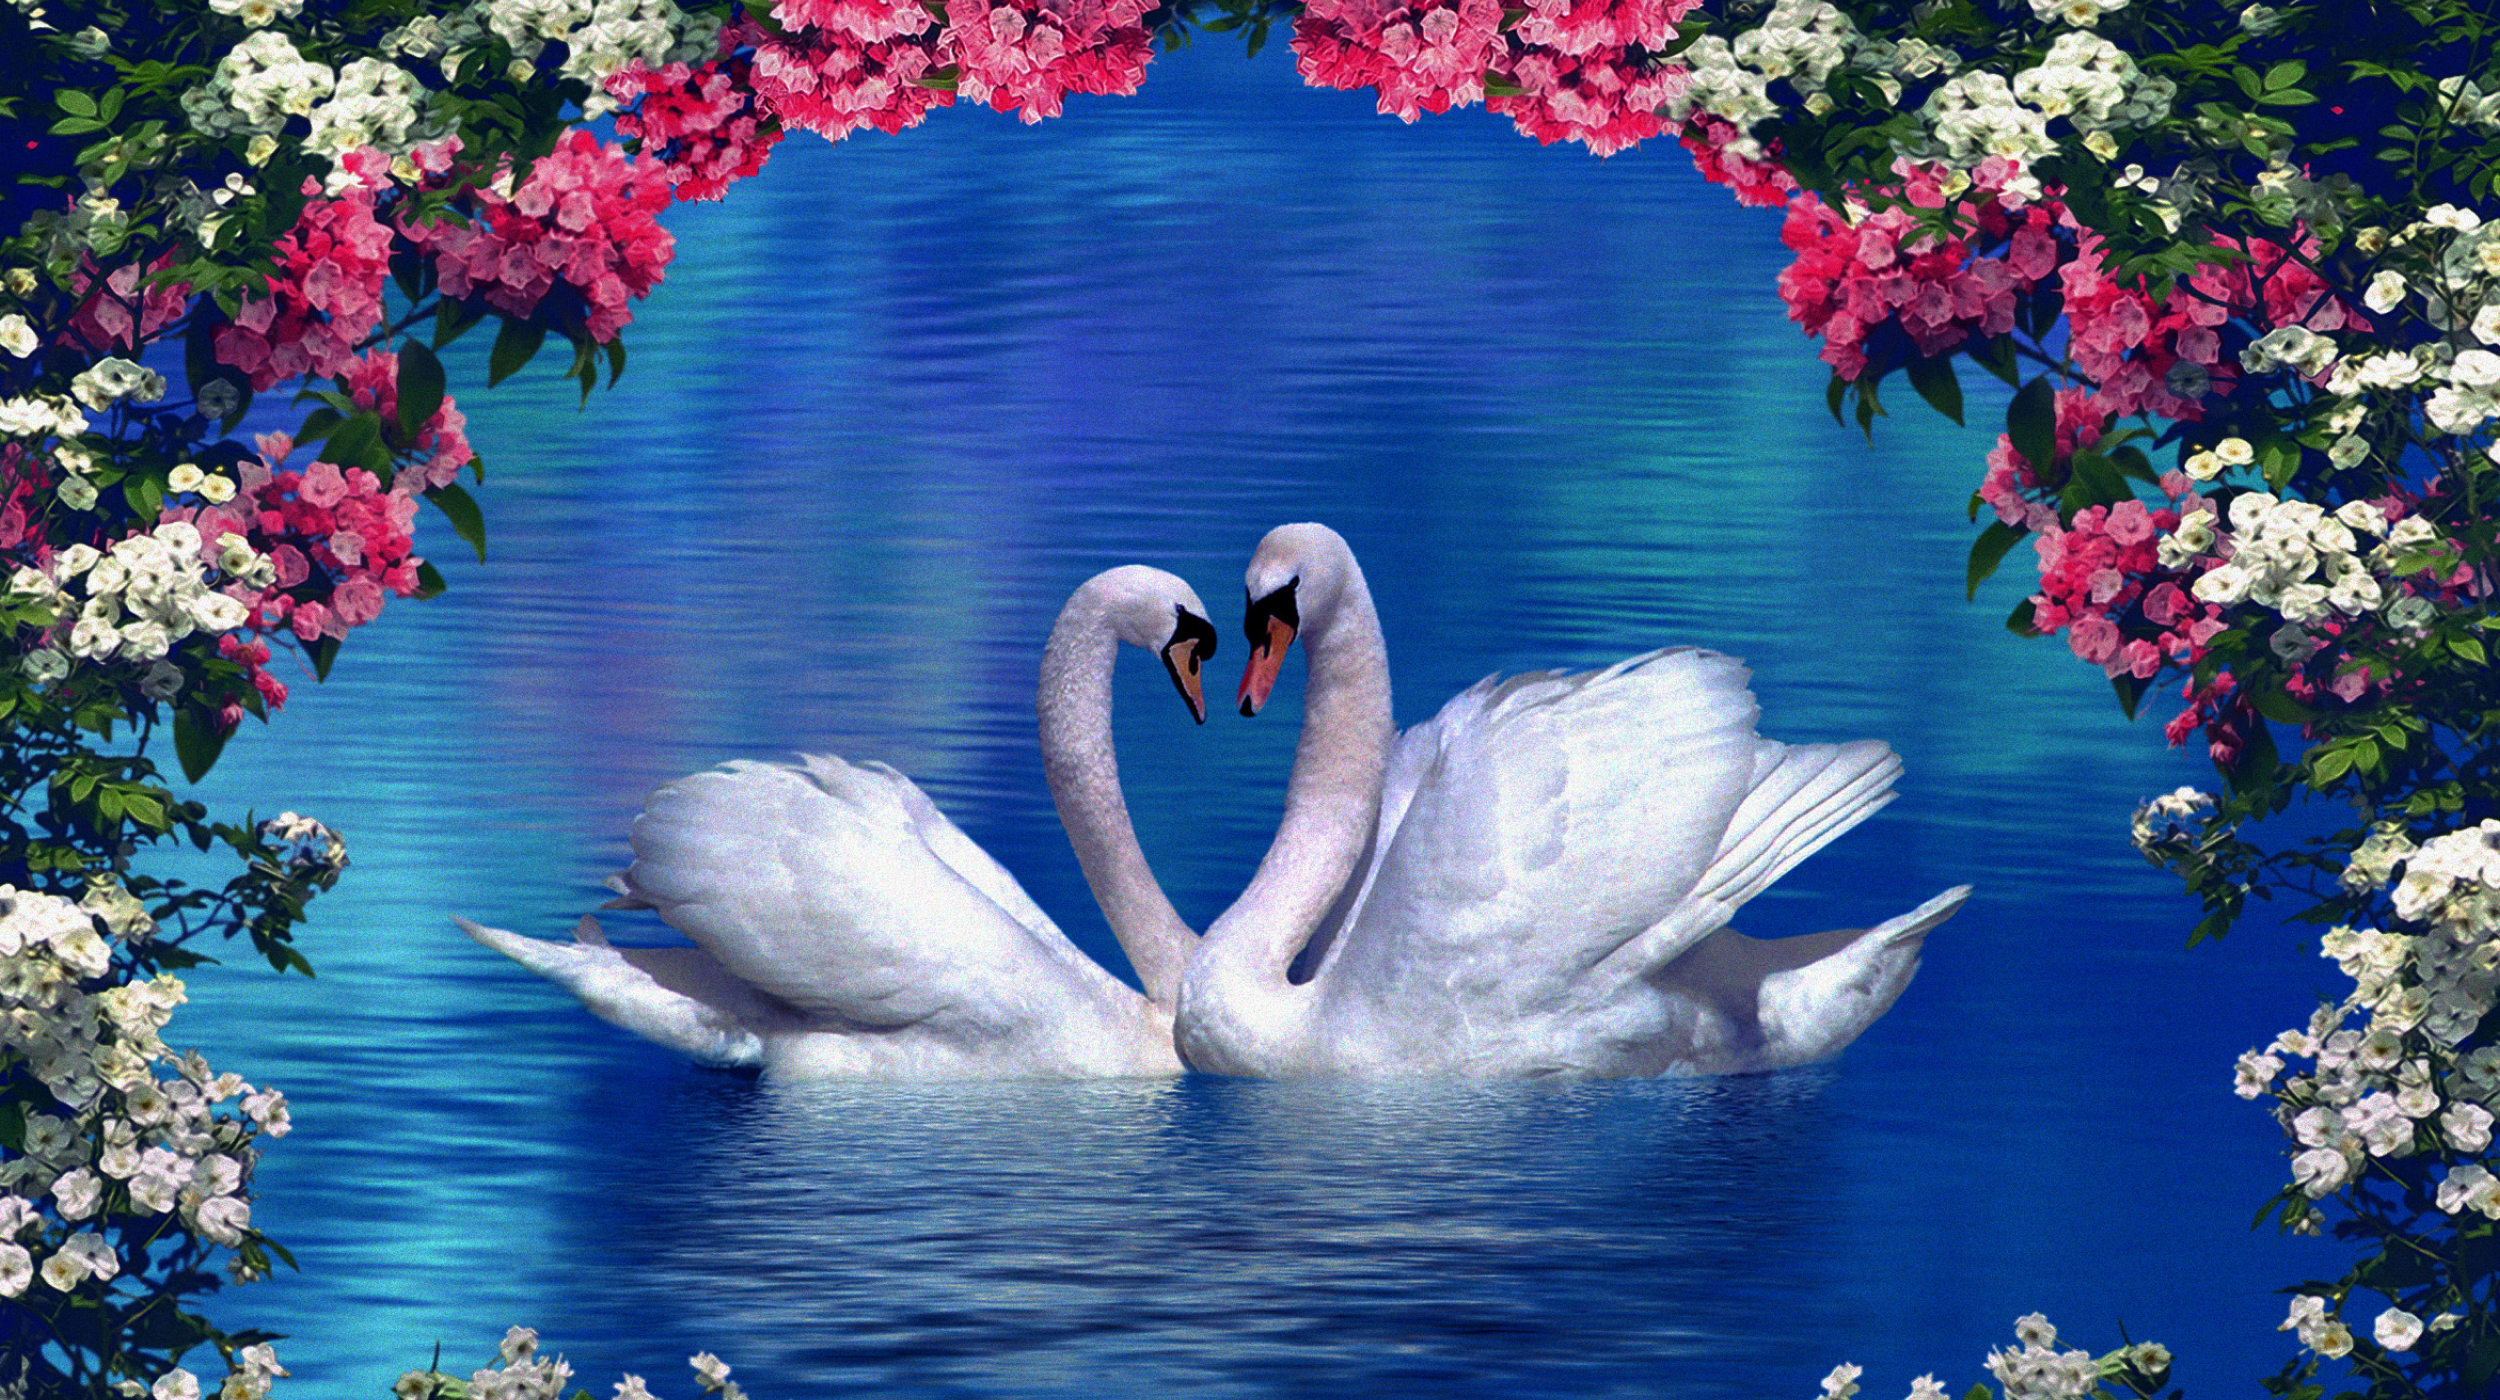 a painting of two swans swimming in a lake.